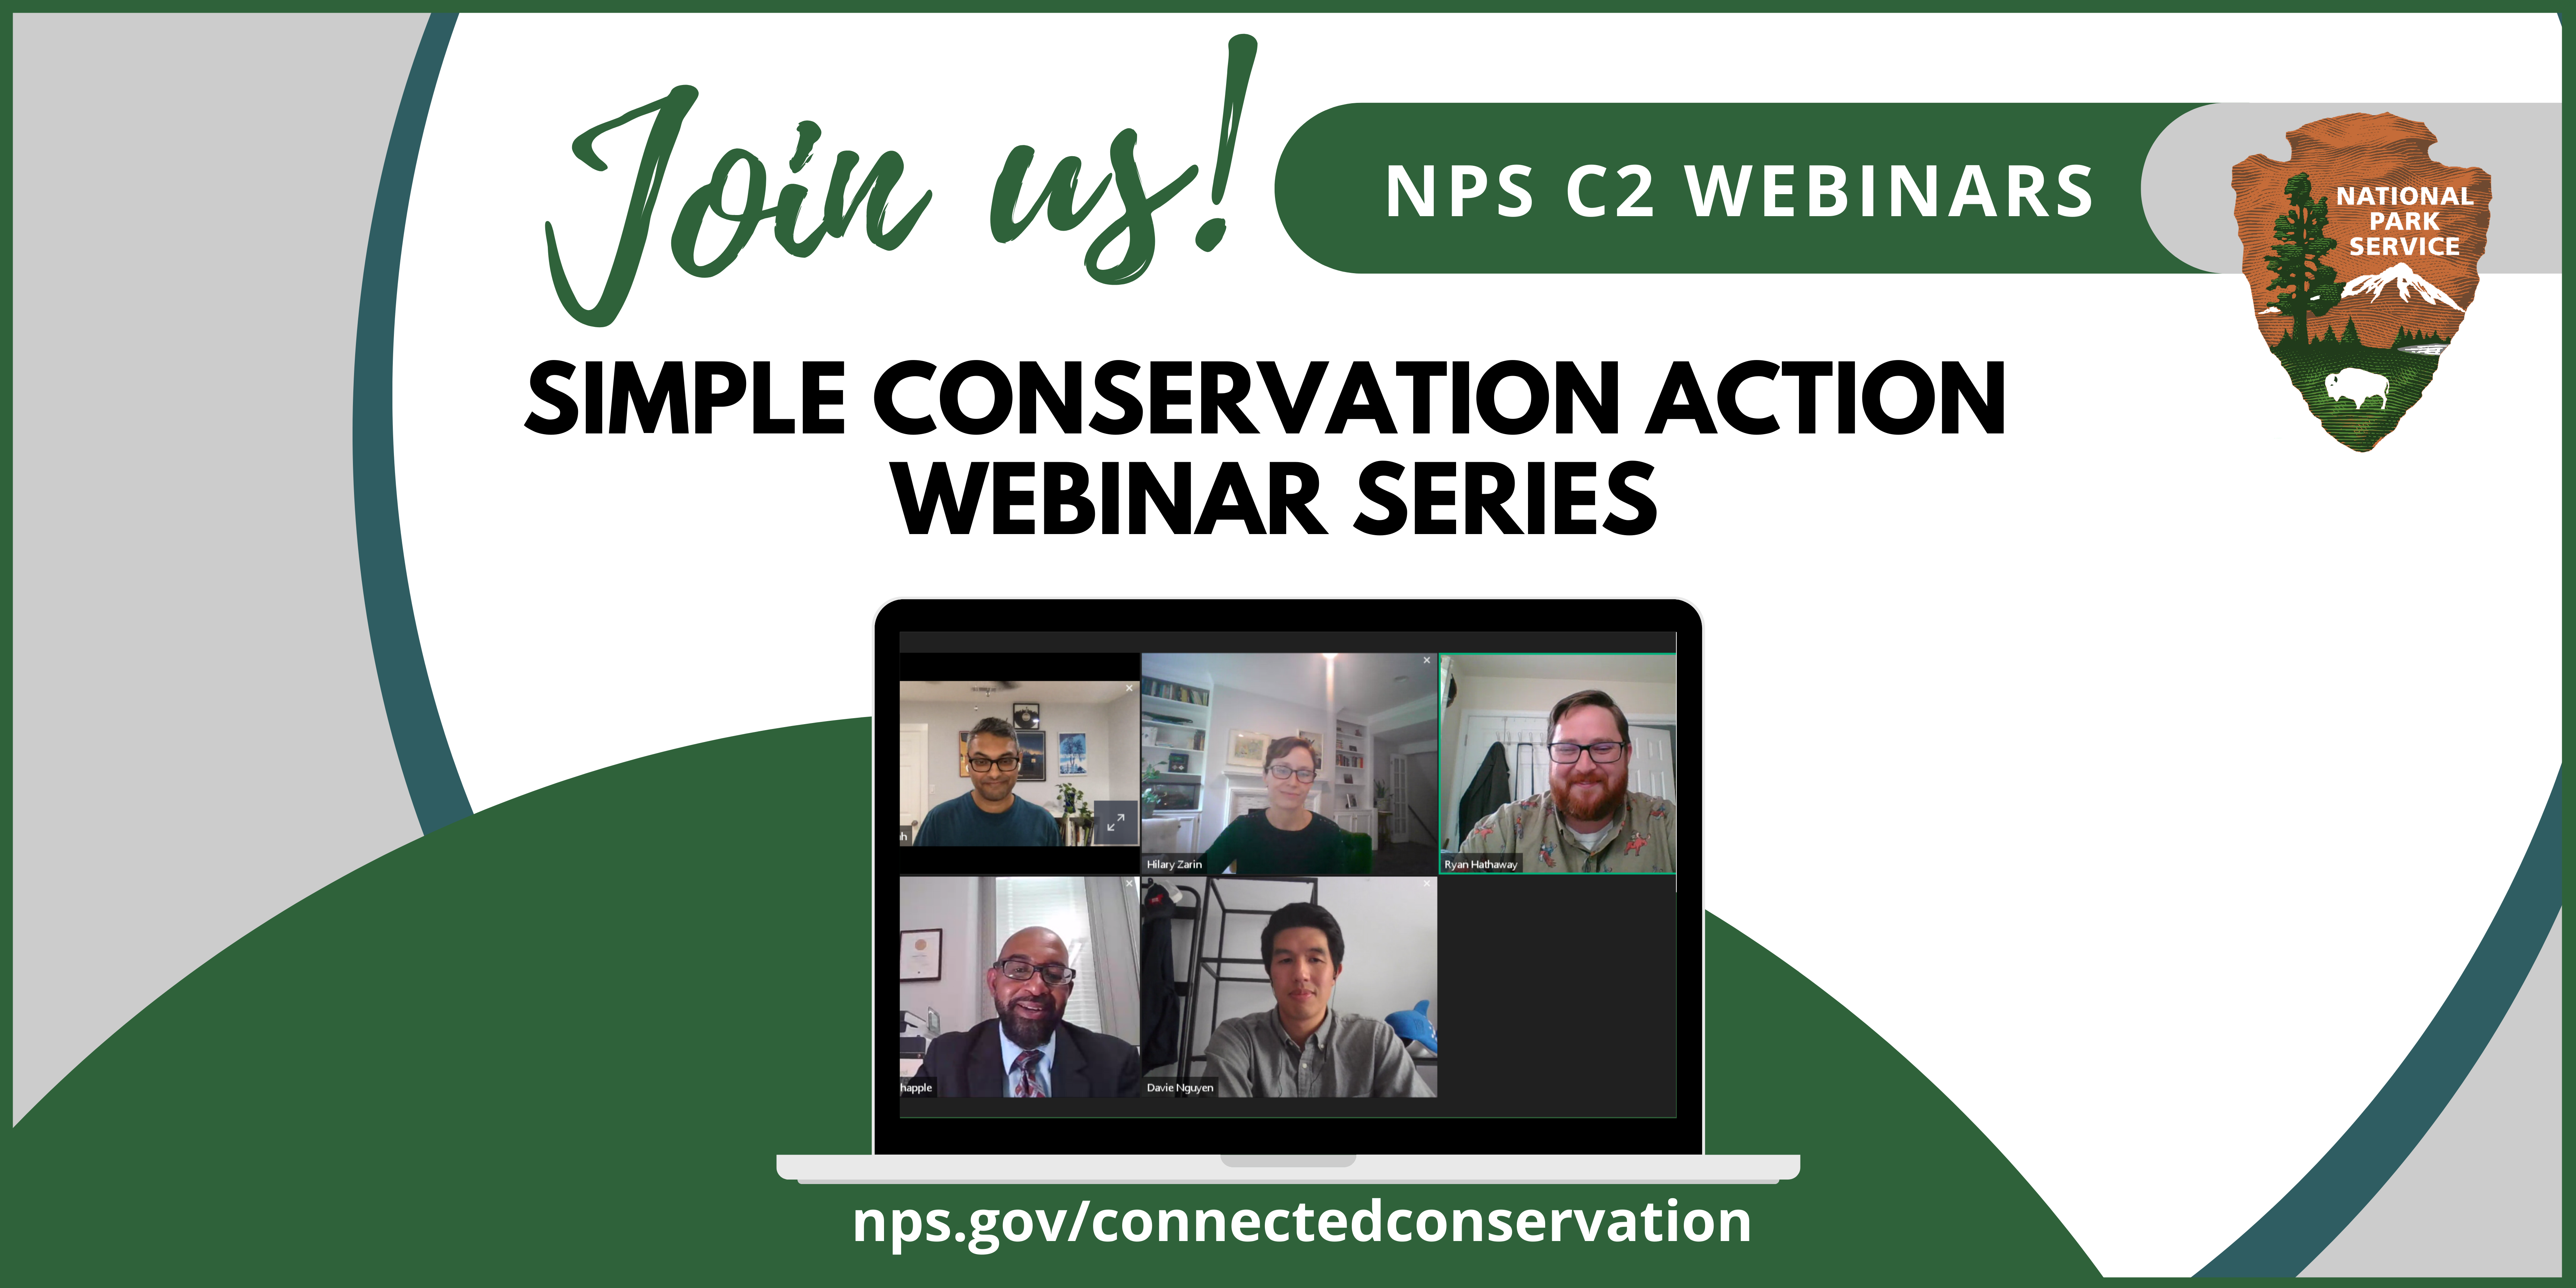 a banner image that says "Join us!" NPS C2 Webinars Simple Conservation Action Webinar Series with a laptop and a screenshot of a webinar